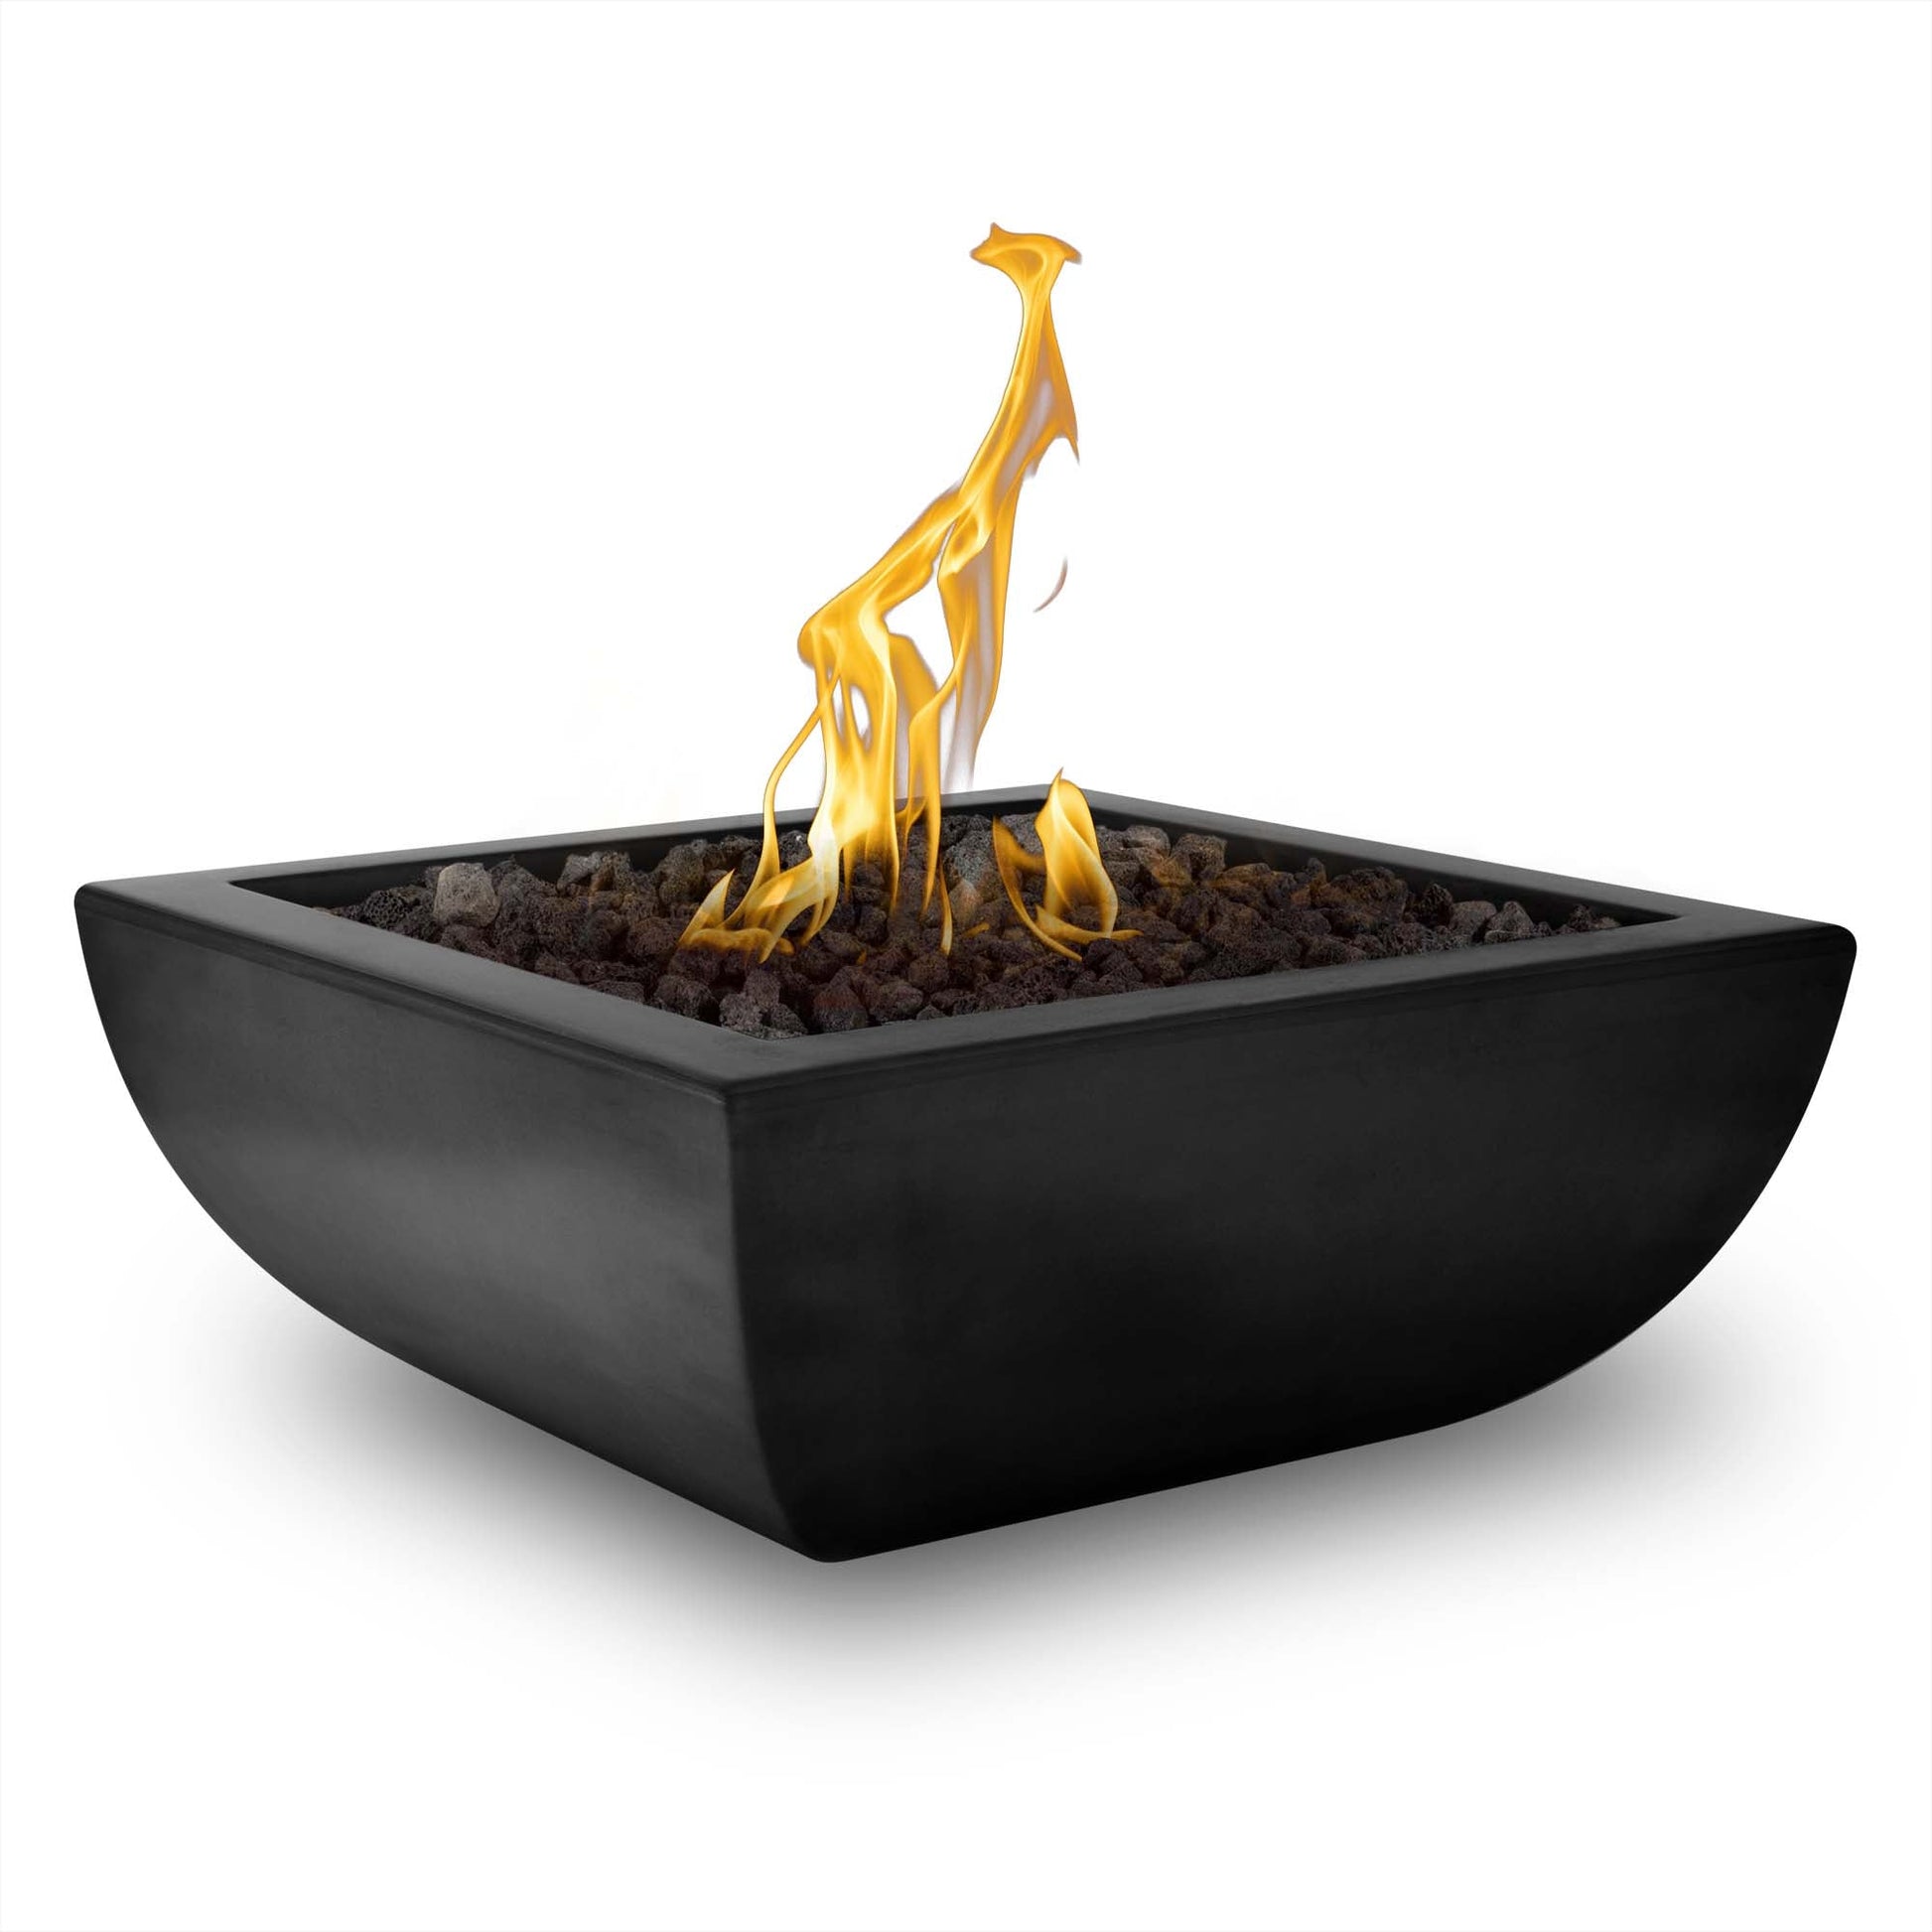 The Outdoor Plus Square Avalon 24" Metallic Slate GFRC Concrete Liquid Propane Fire Bowl with Match Lit with Flame Sense Ignition